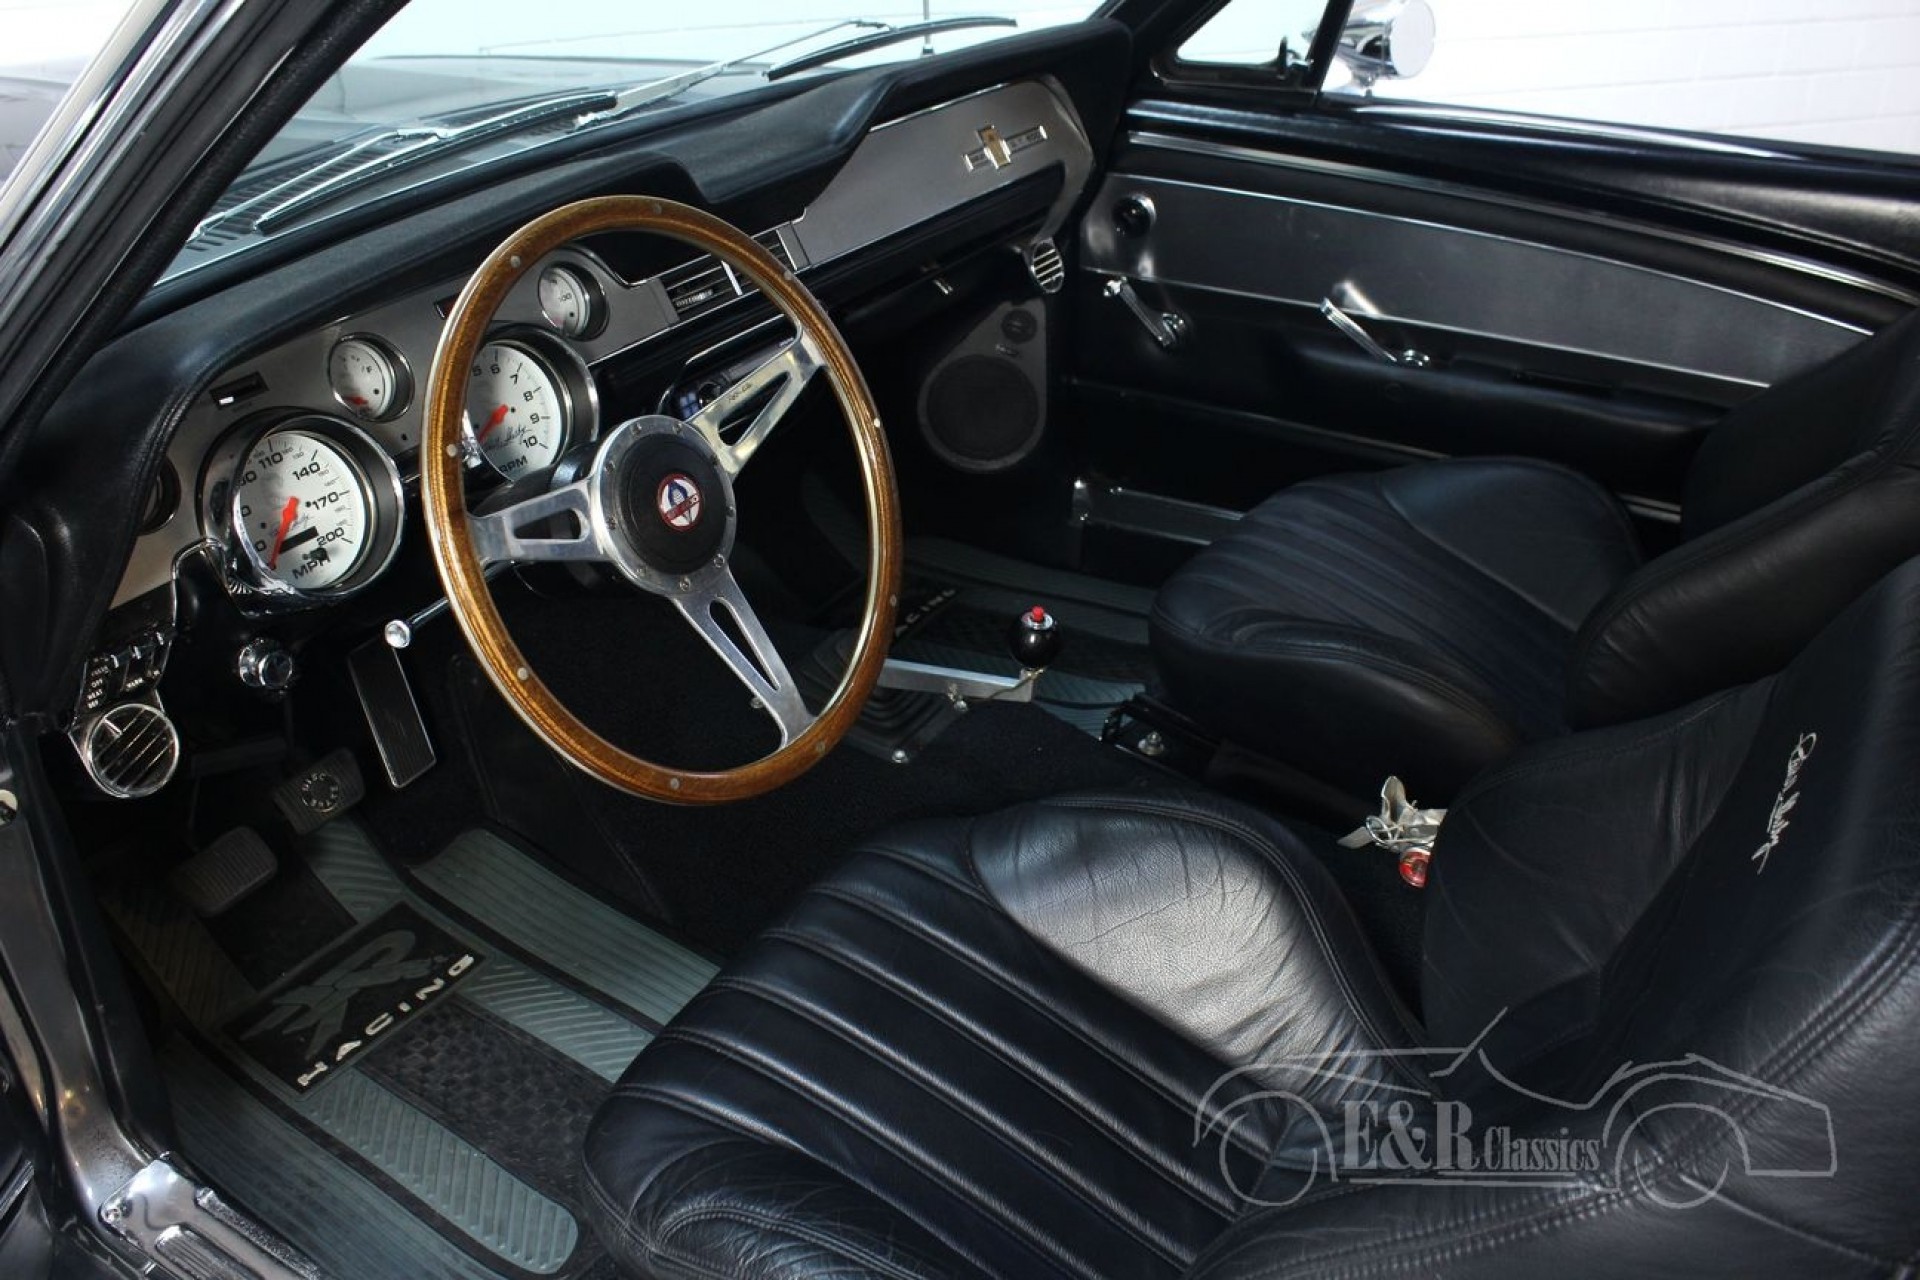 Ford Mustang Fastback Gt500 Shelby Eleanor 1967 For Sale At Erclassics